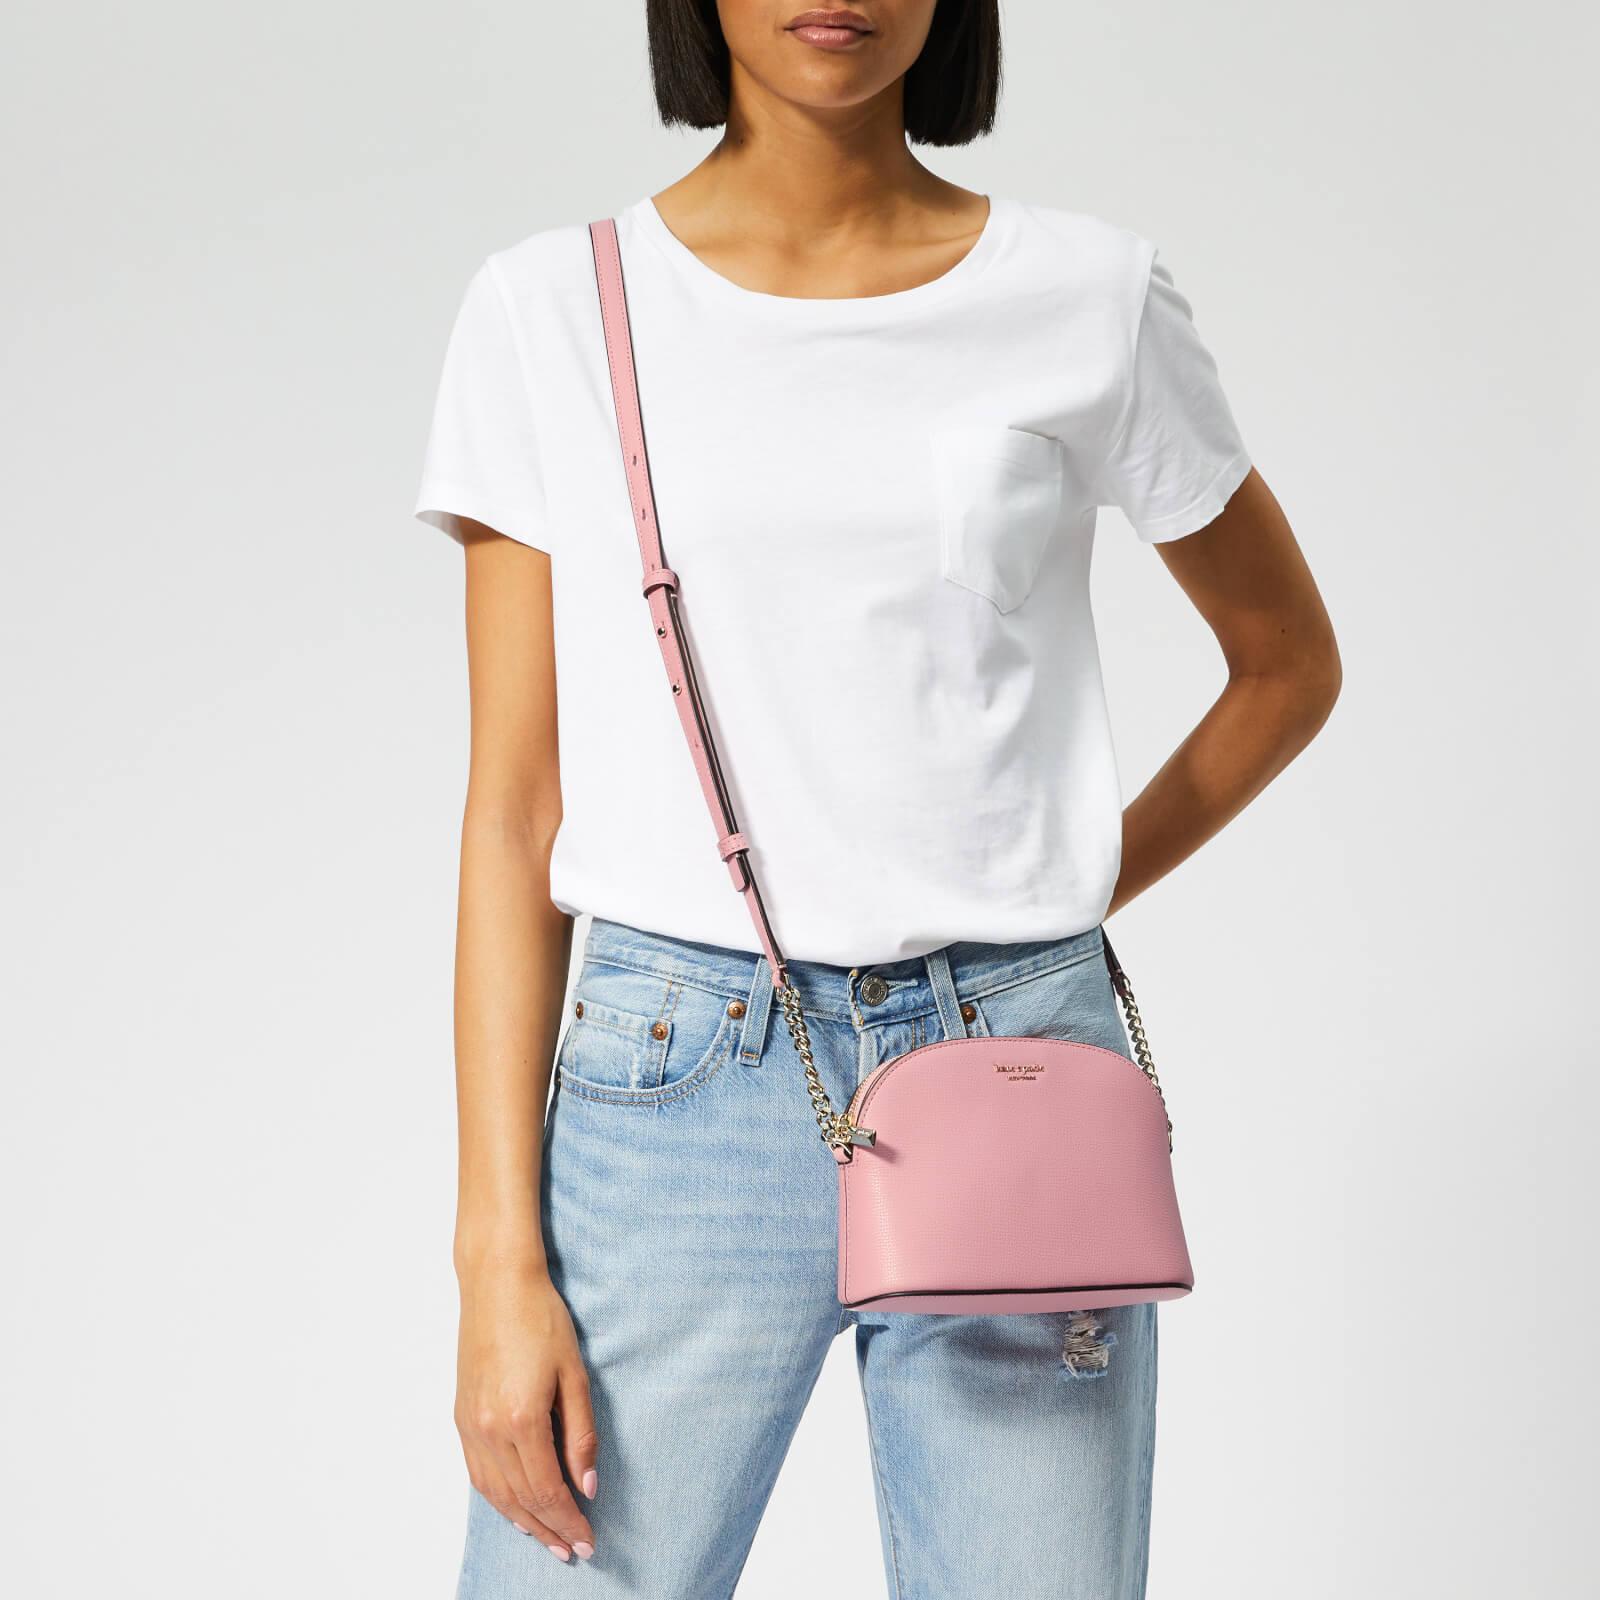 Kate Spade Sylvia Small Dome Cross Body Bag in Pink | Lyst